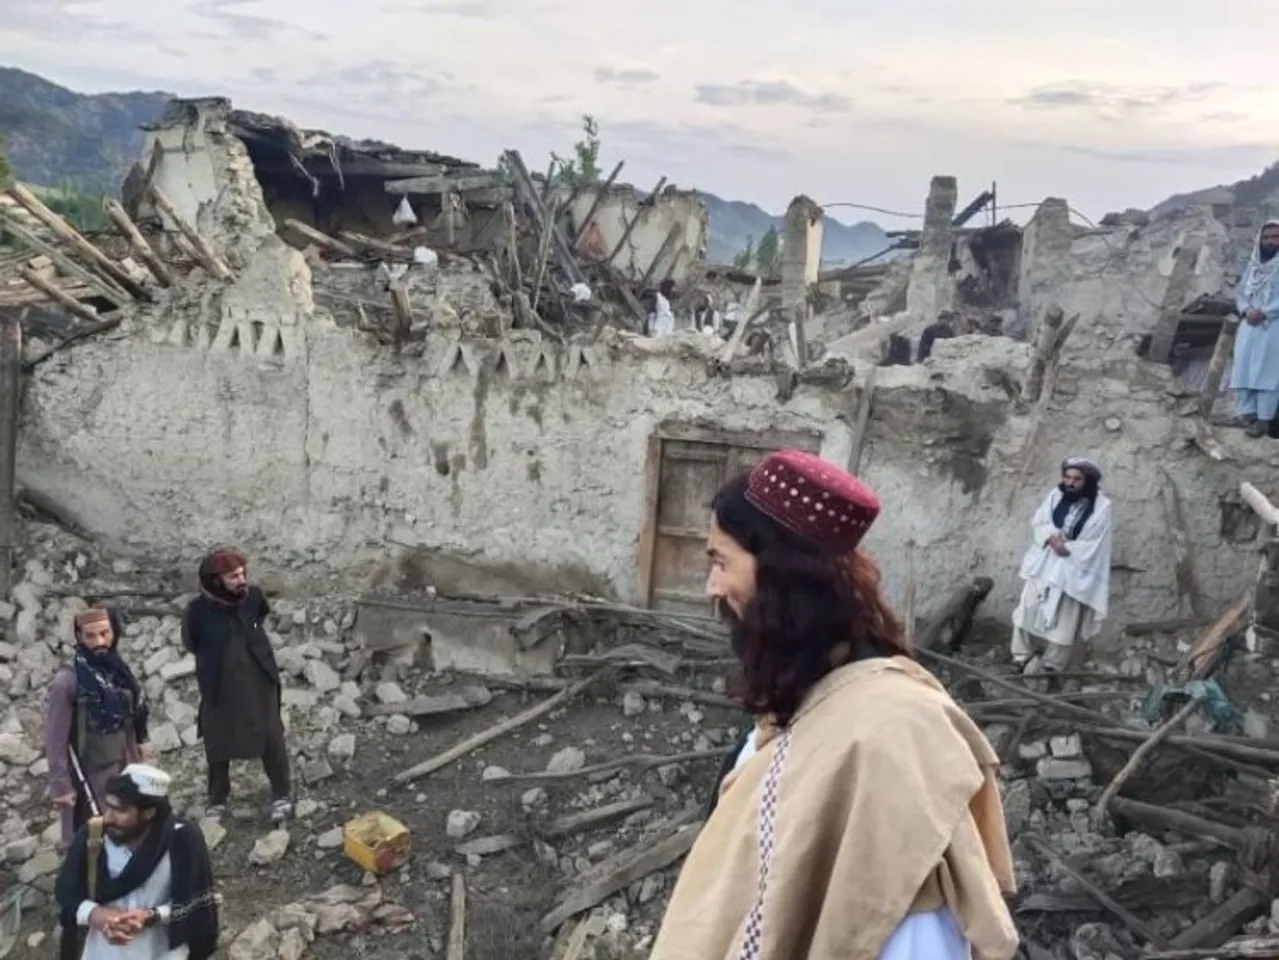 Many has been injured and lost lives in the massive earthquake of Afghanistan